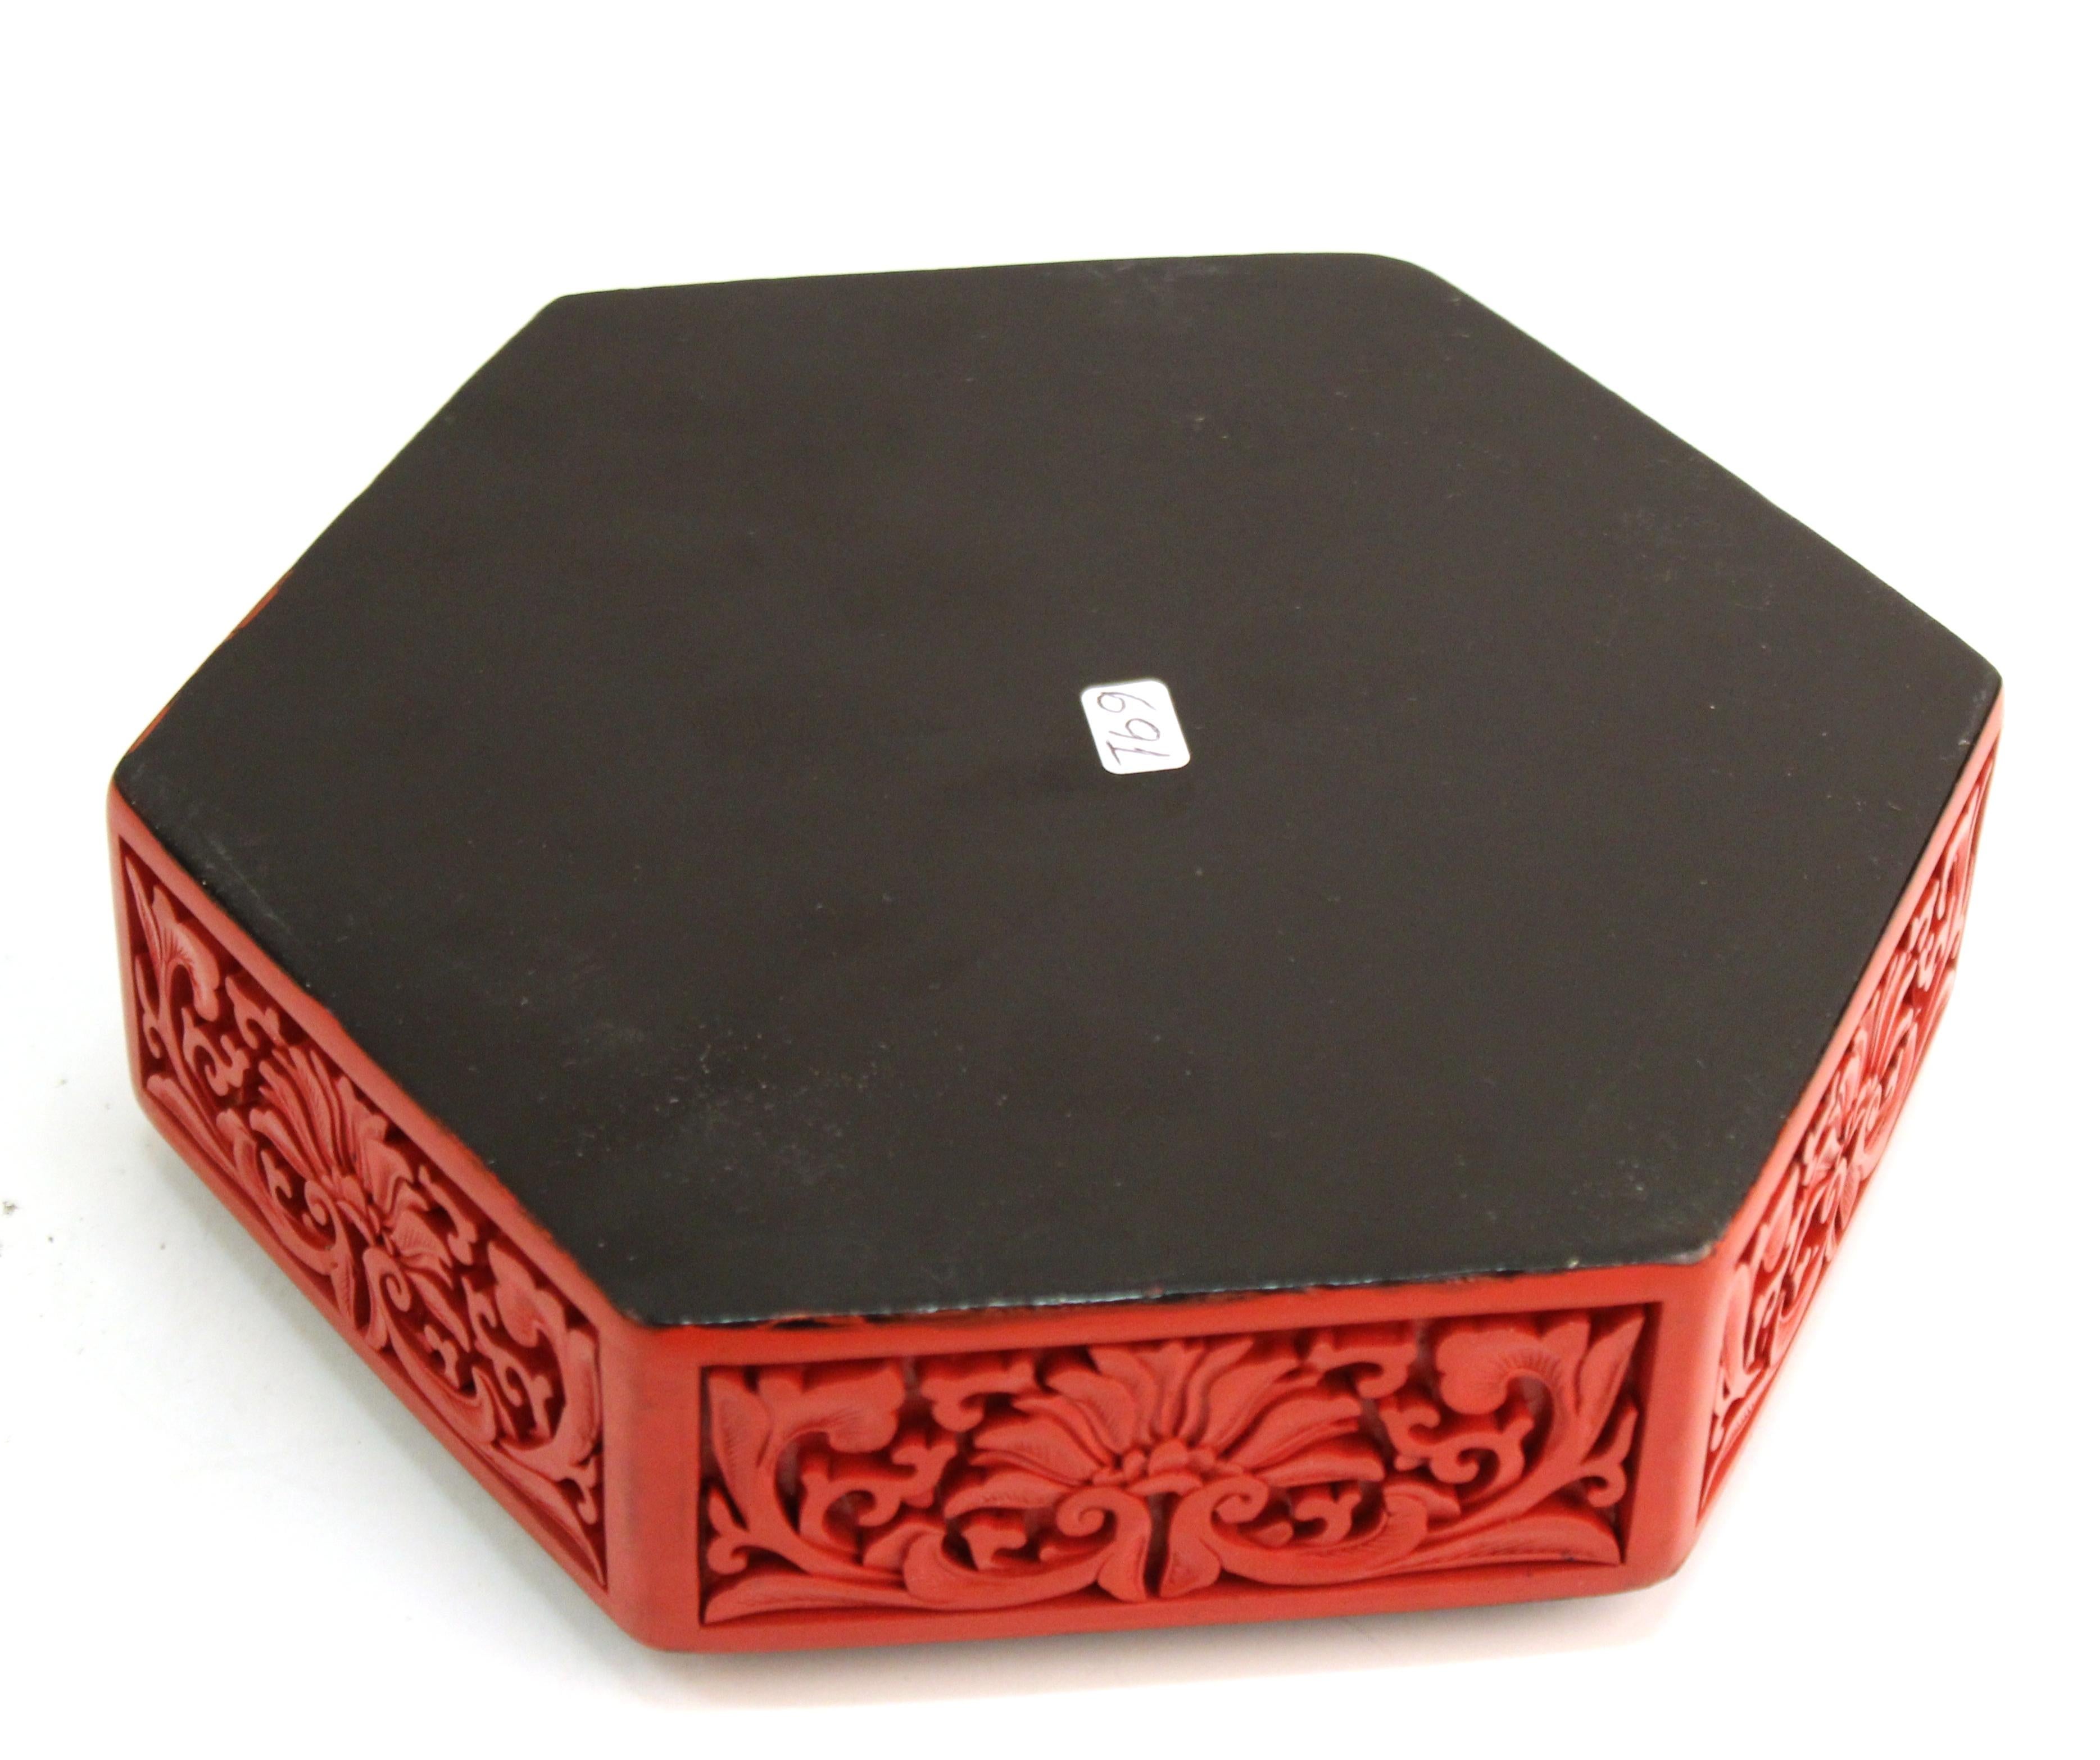 Lacquer Chinese Cinnabar Box with Dragon Motif